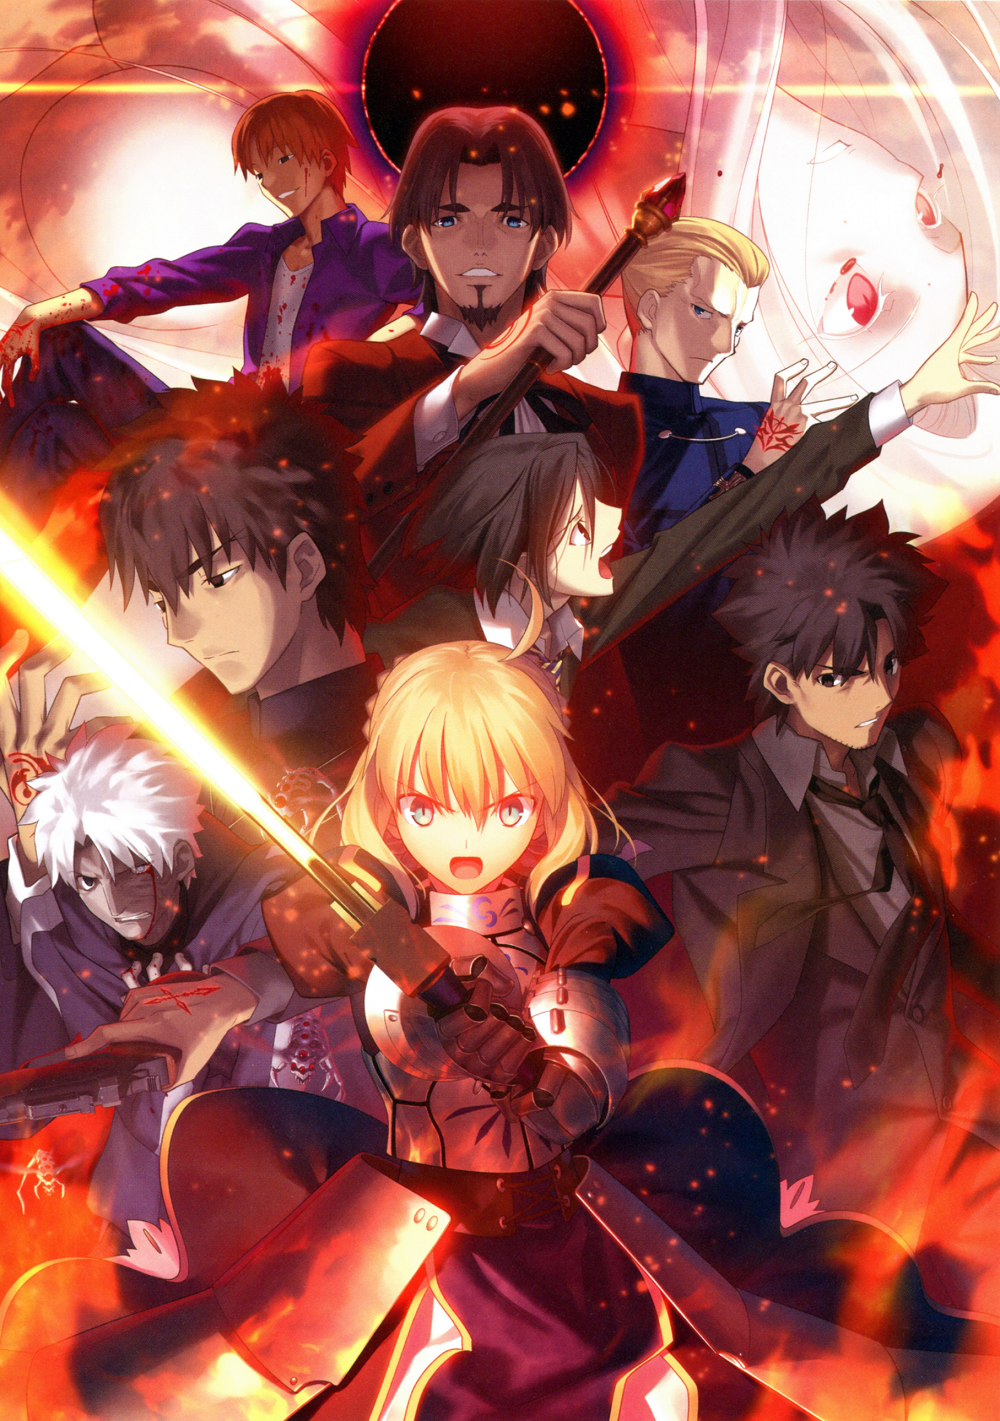 Aniplex Gives Glimpse Into Vampire Nobility in The Case Study of